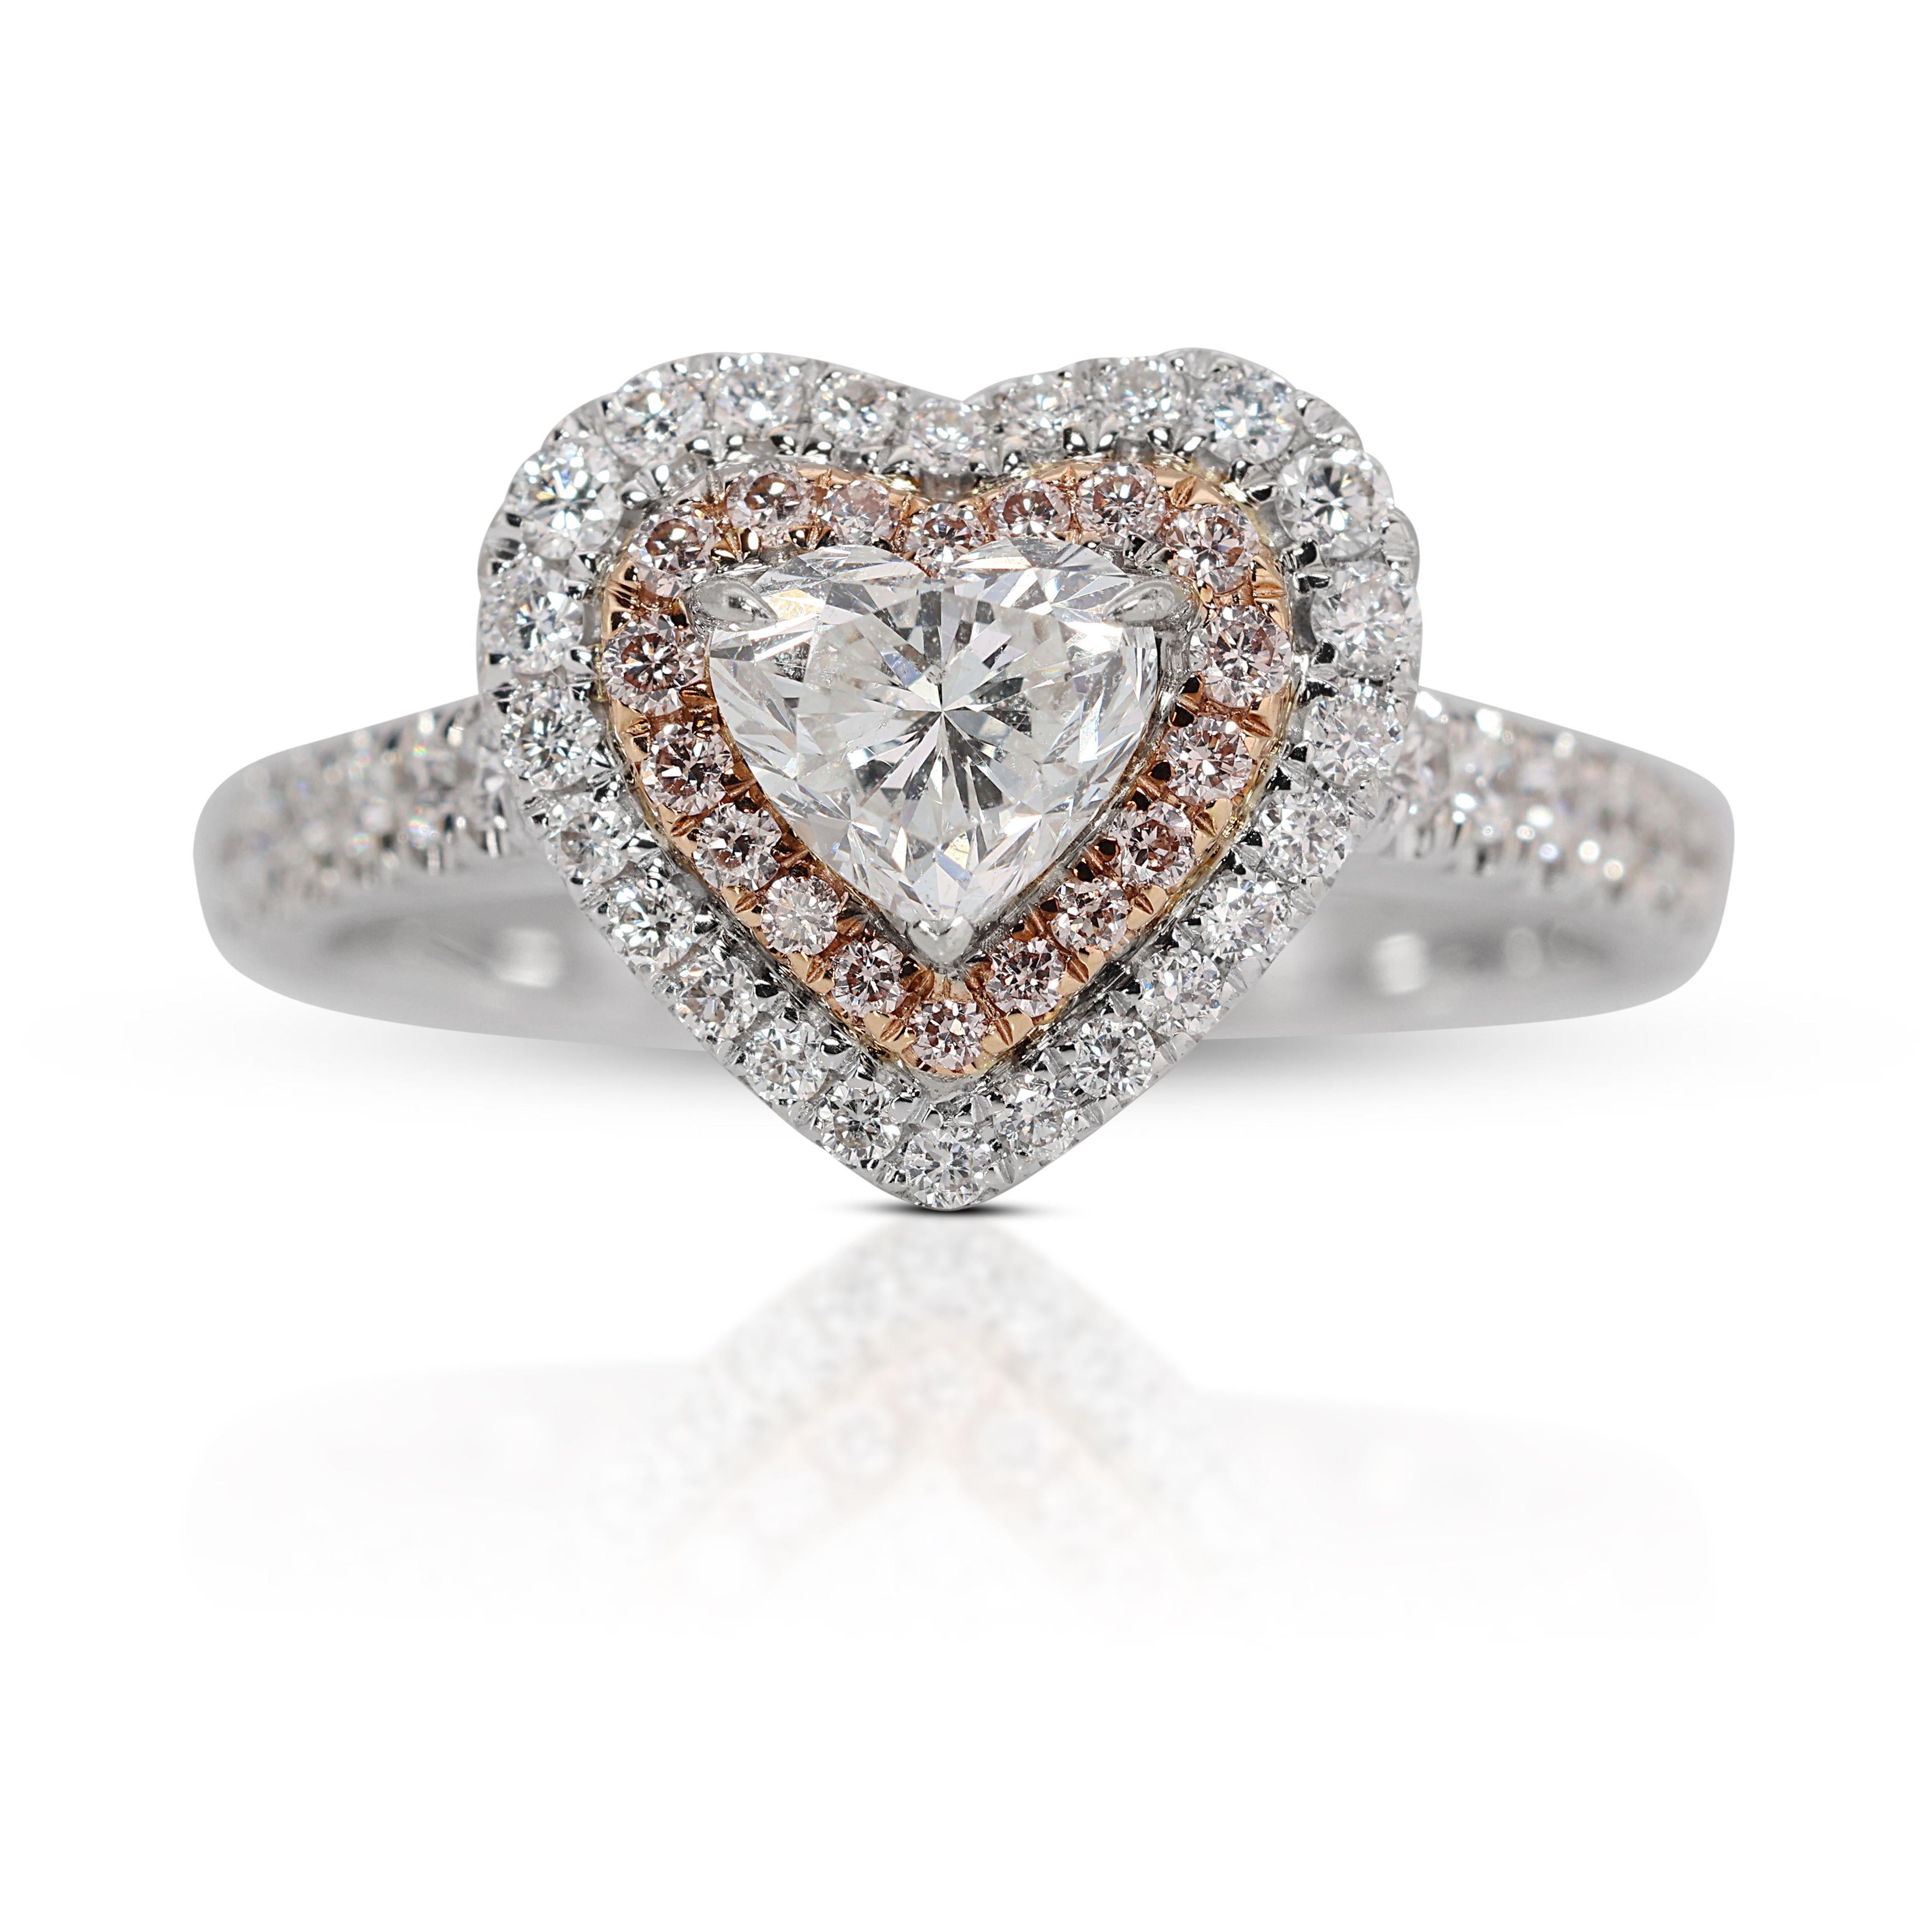 Heart Cut Beautiful 1.19ct Heart-shaped Diamond Ring in 18K White Gold For Sale